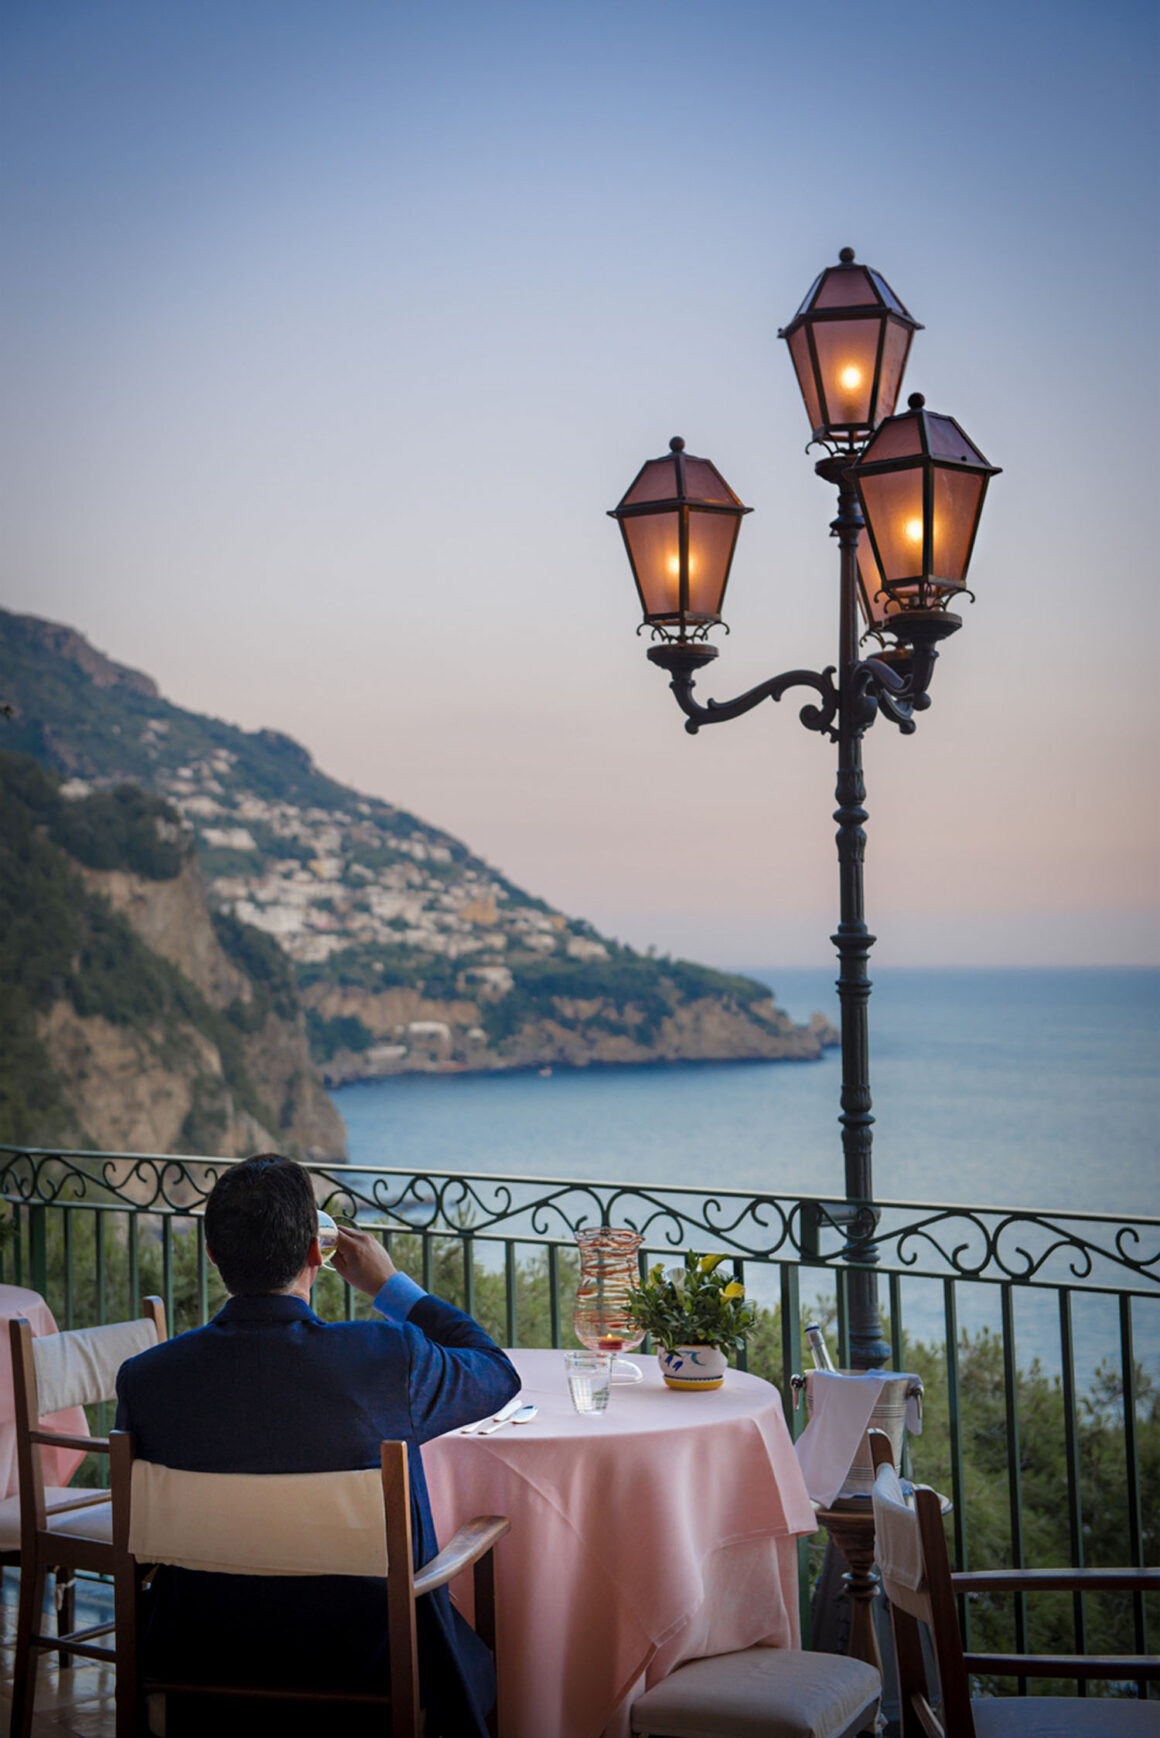 One of the best restaurants in Positano, Italy, Zass, pictured here with the view overlooking the ocean